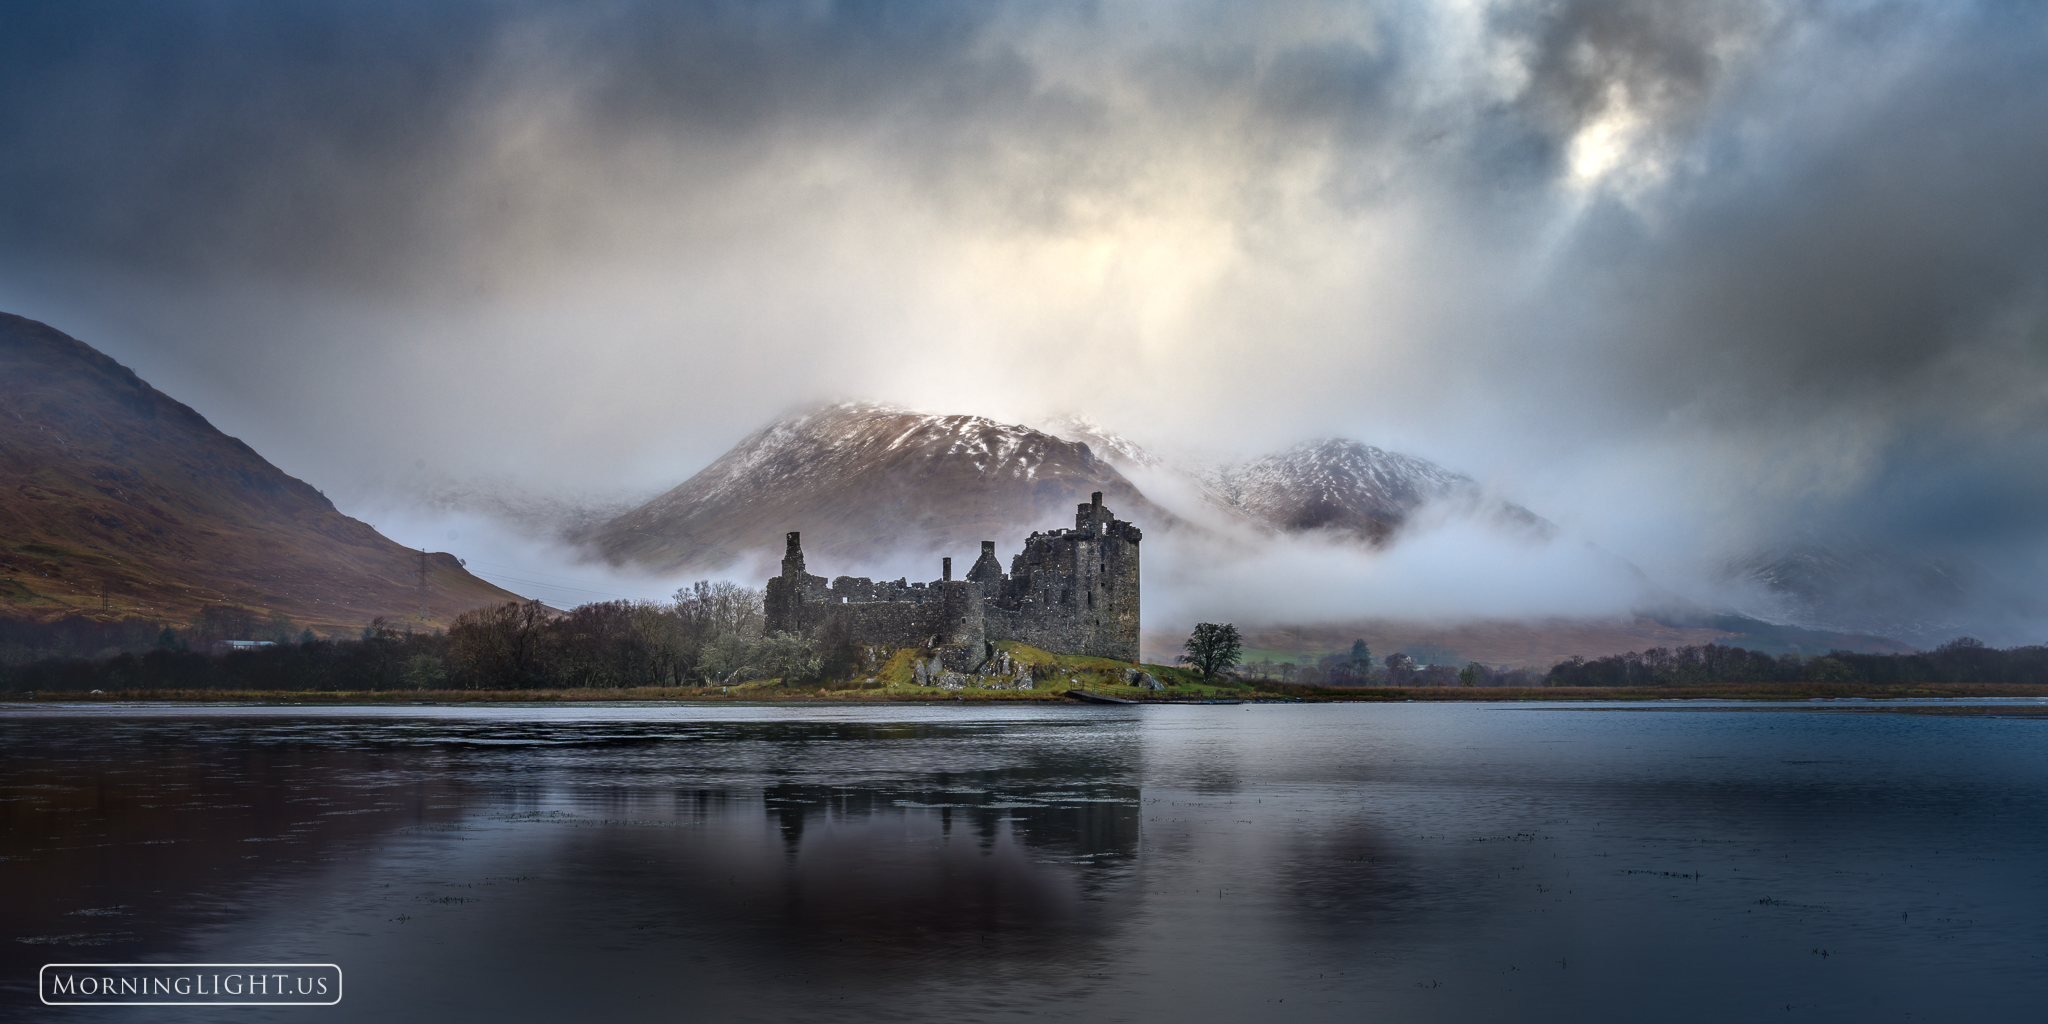 Kilchurn Castle in the Highlands of Scotland appears calm despite the surrounding storm.